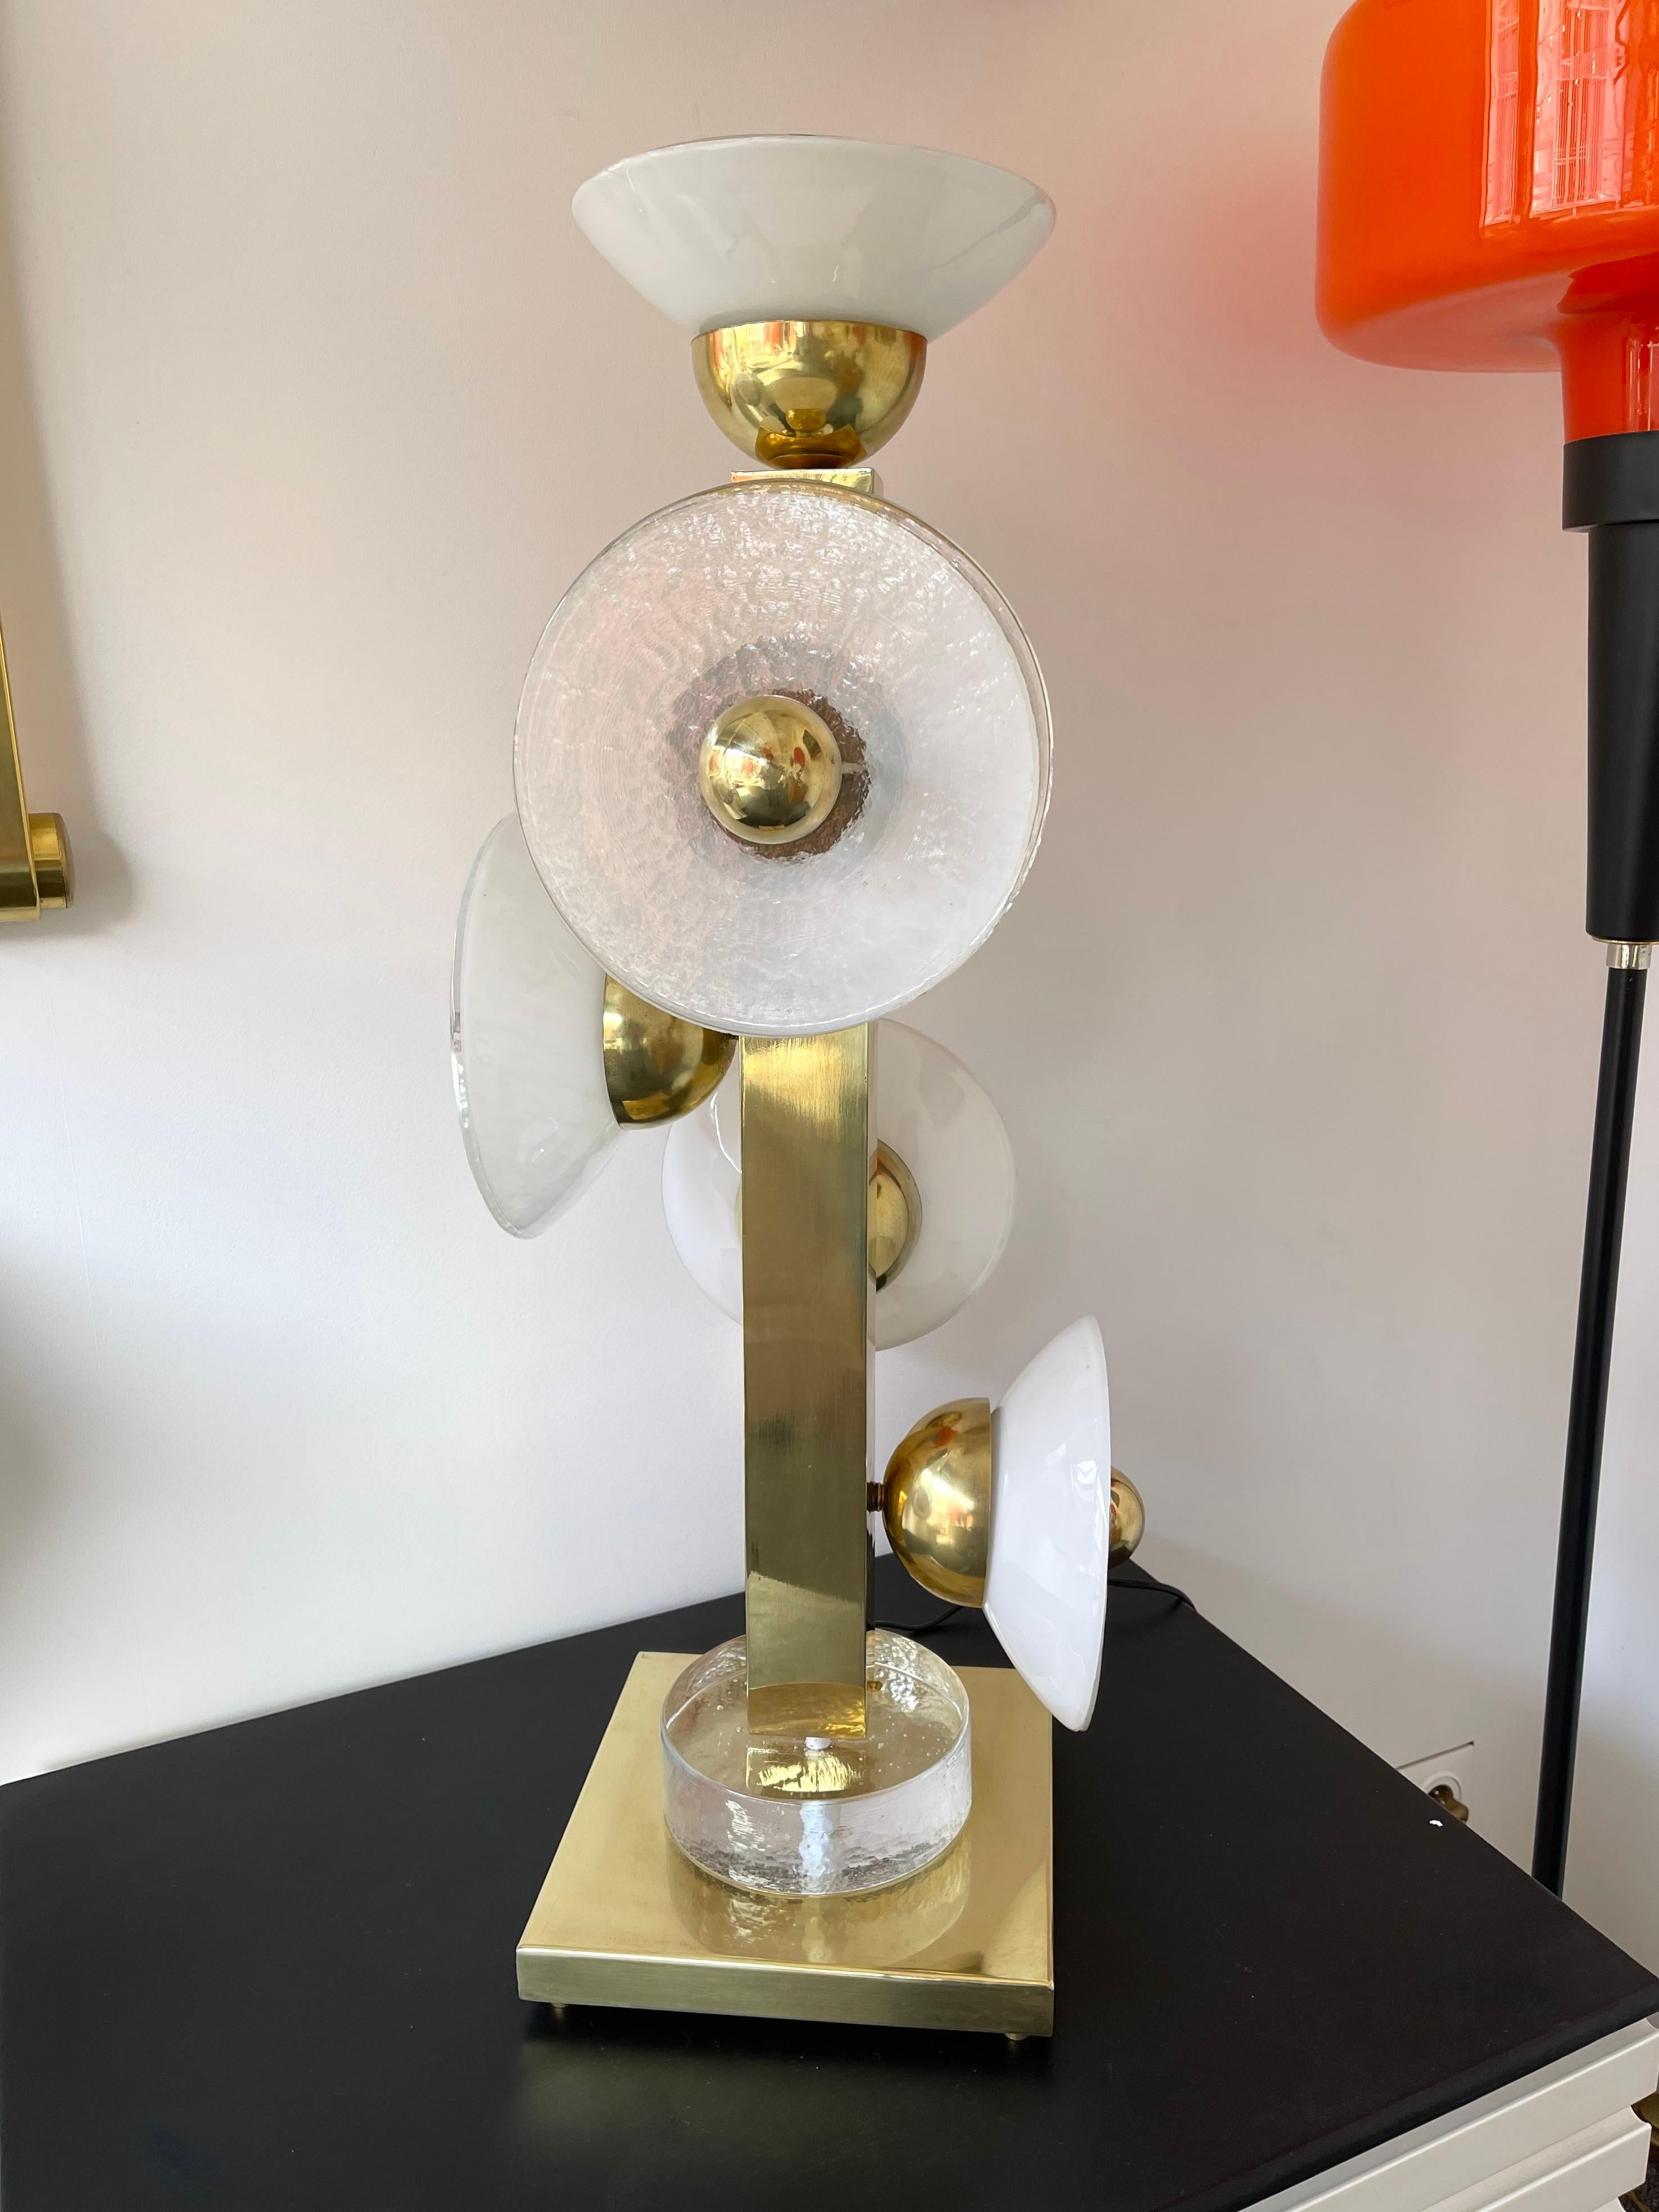 Pair of Murano glass parabolic cone and brass table or bedside lamps. Contemporary work from a small artisanal italian design workshop. In the mood of Mid-Century Modern, Hollywood Regency, Venini, Mazzega, La Murrina, Veronese, Barovier, Fratelli